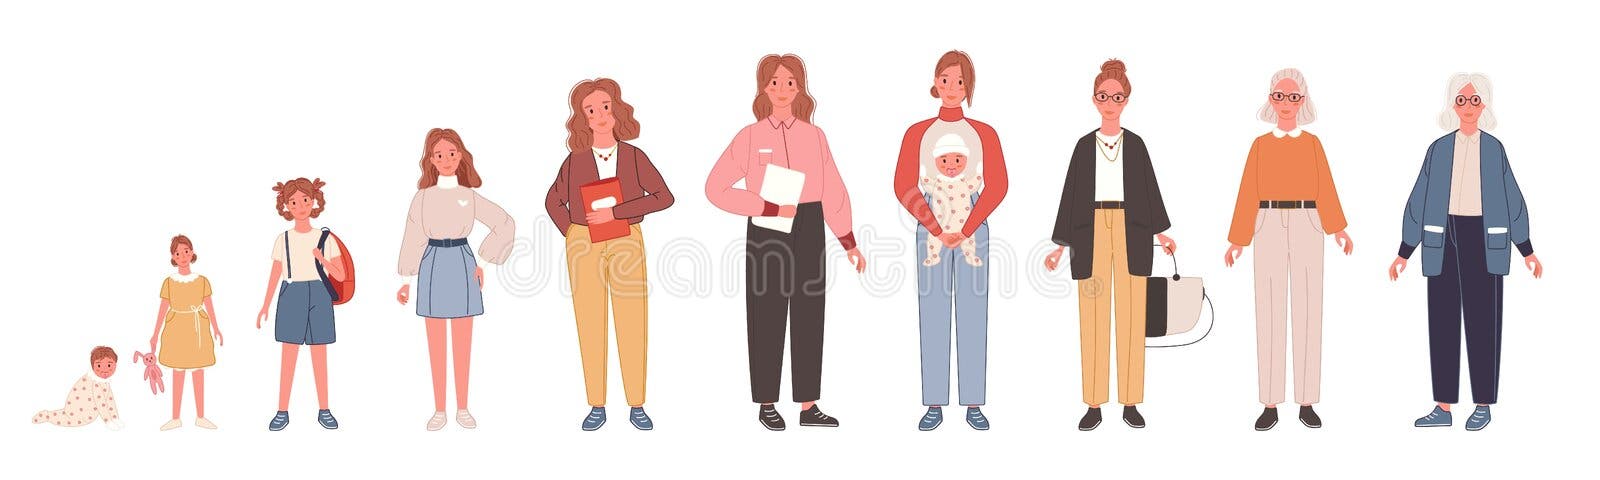 Human in Different Ages from Baby To Old Person Stock Vector ...